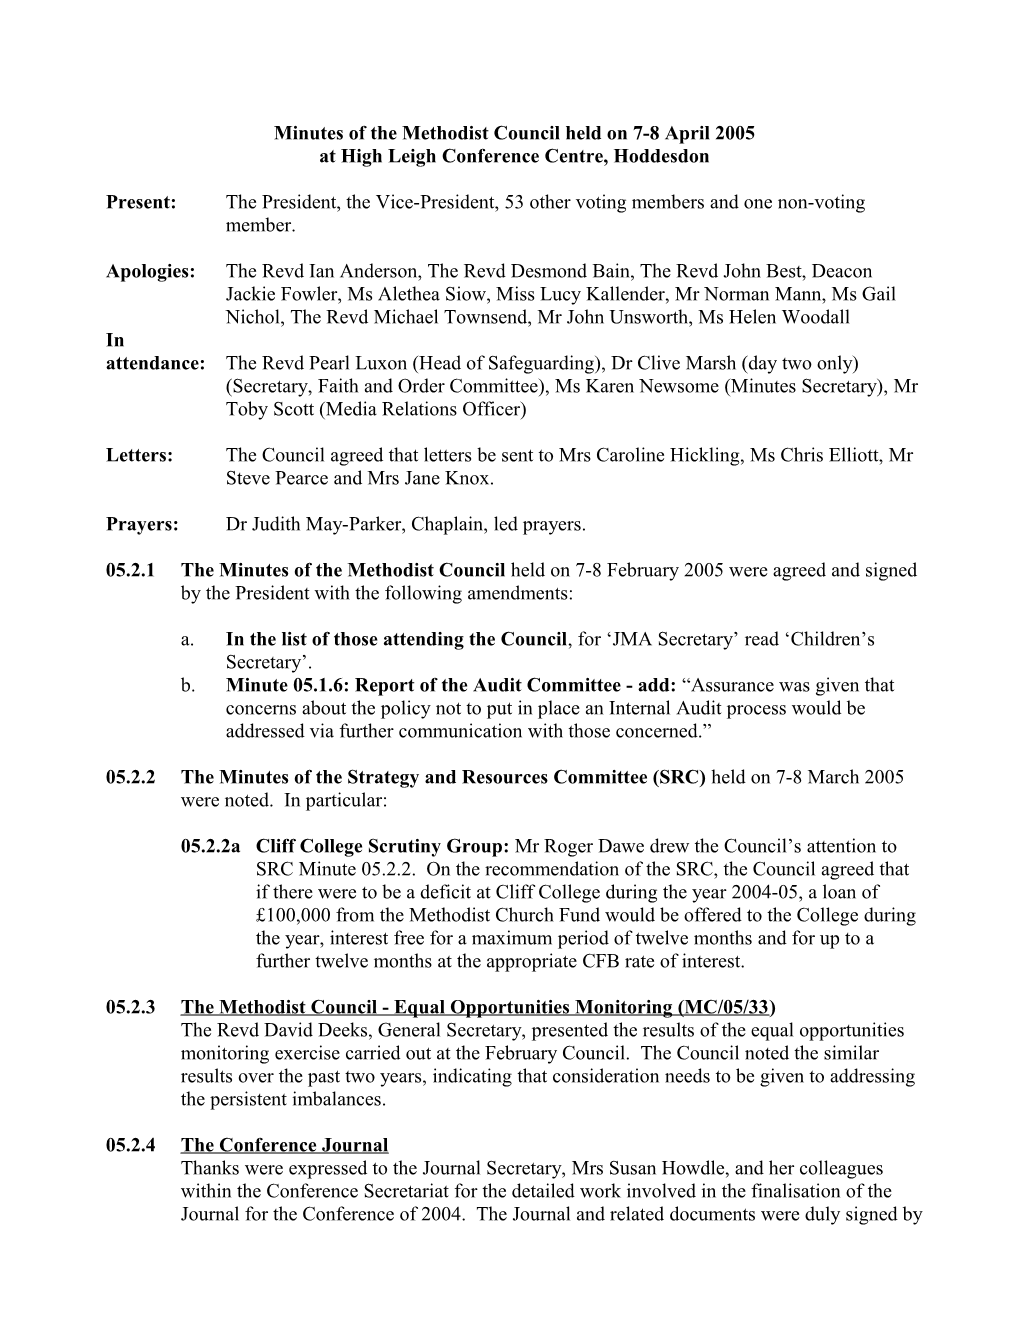 Minutes of the Methodist Council Held on 7-8 April 2005